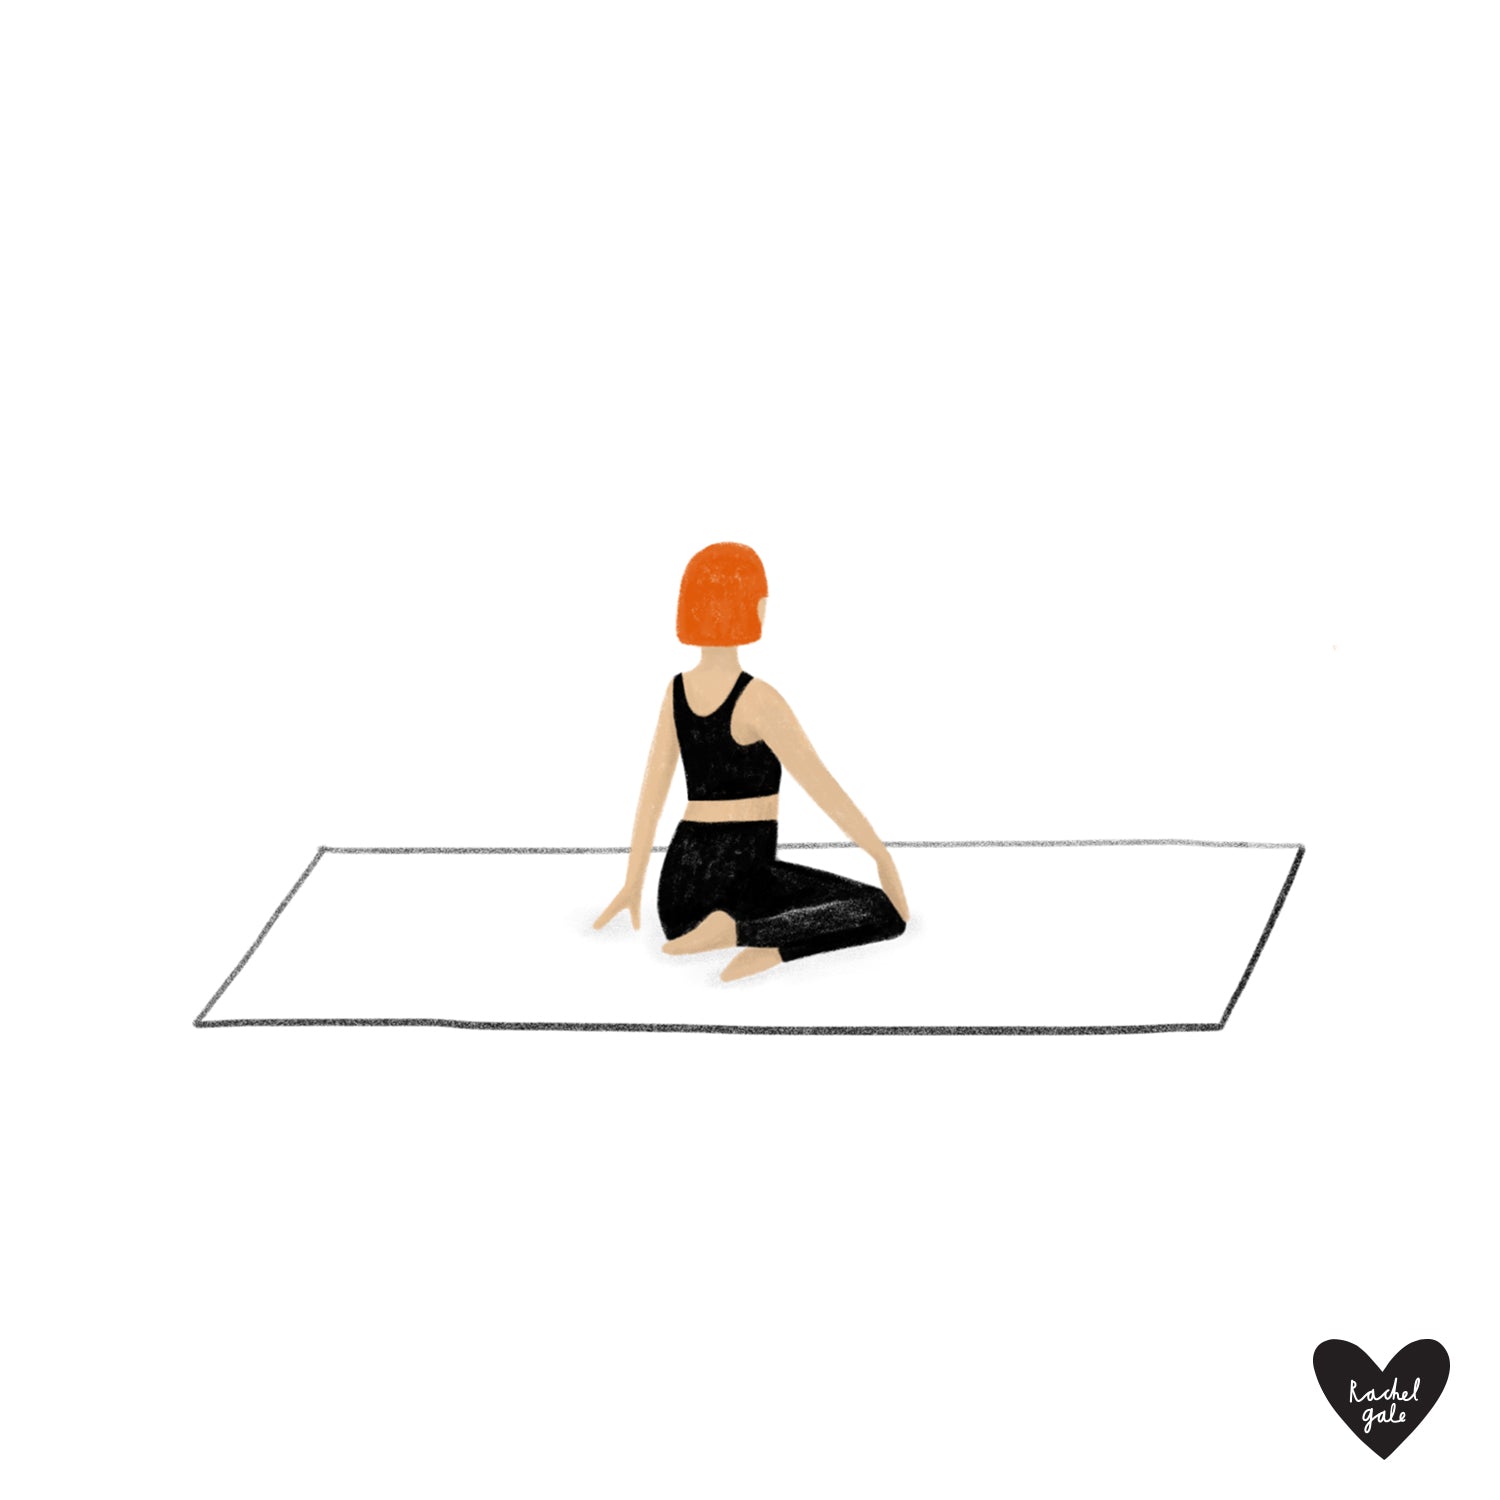 'Happy Yogis' - Yoga Pose Art Print - Size A3 & A2 - Unframed, quality recycled paper stock